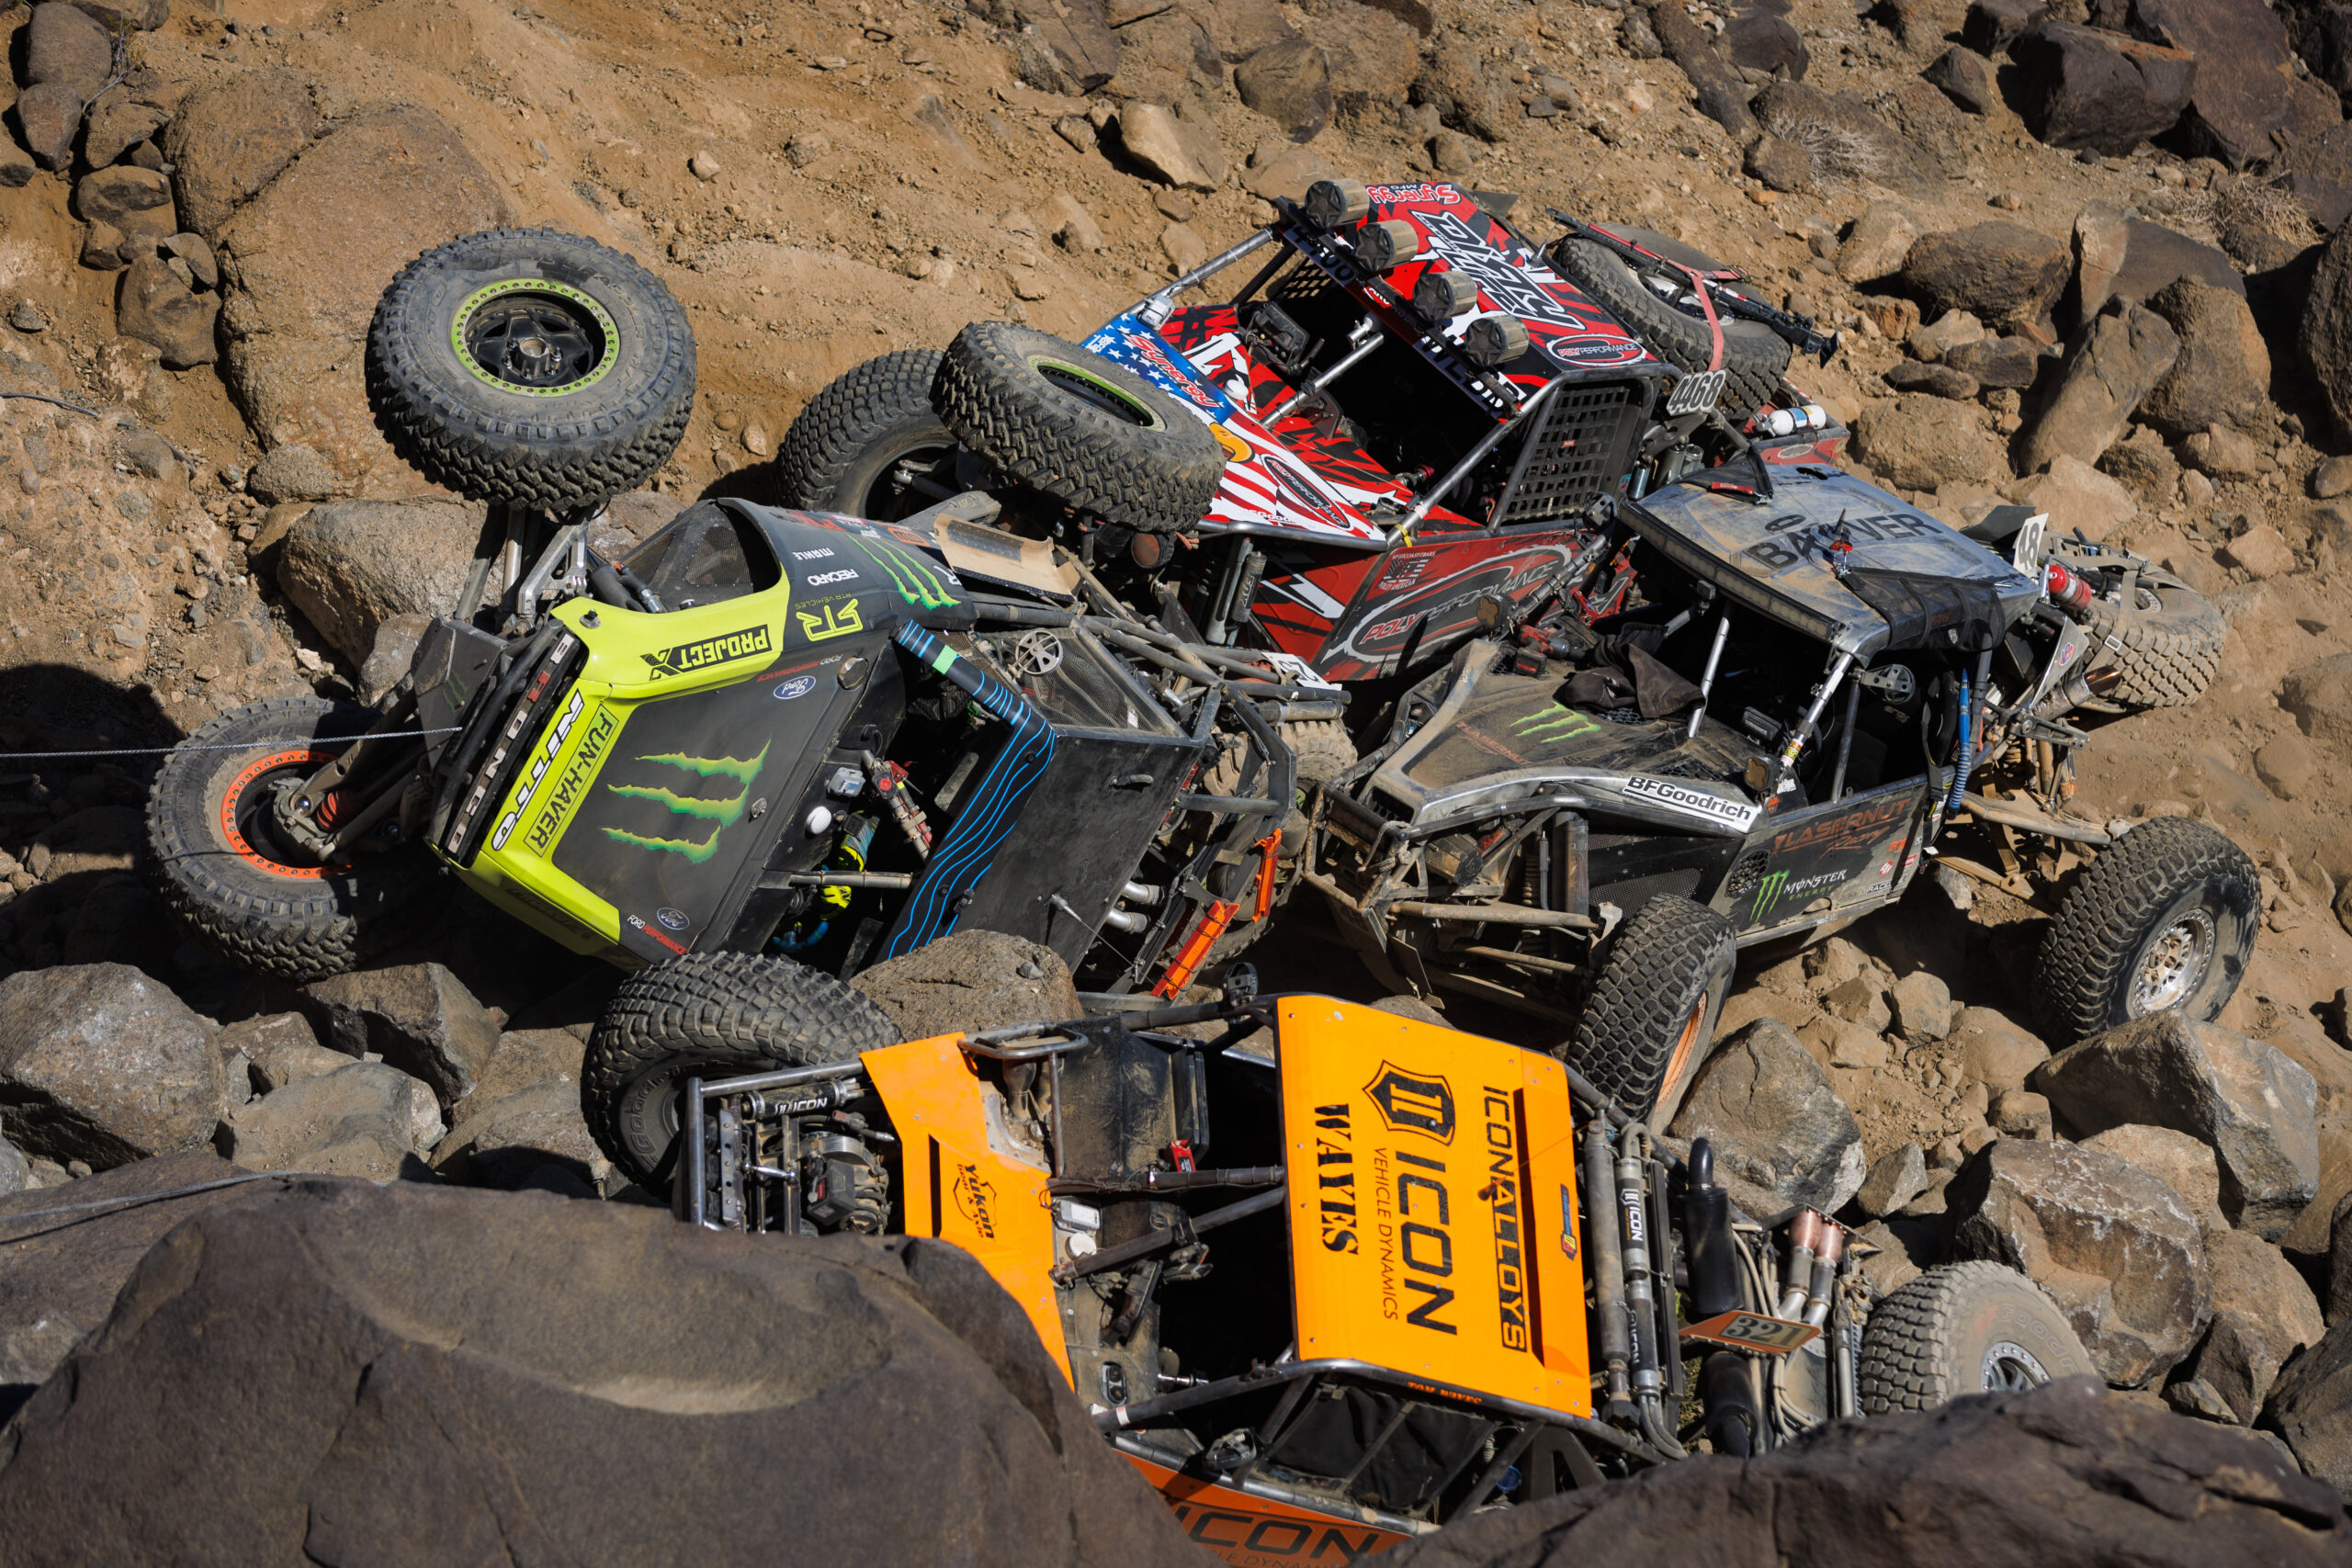 King of Hammers